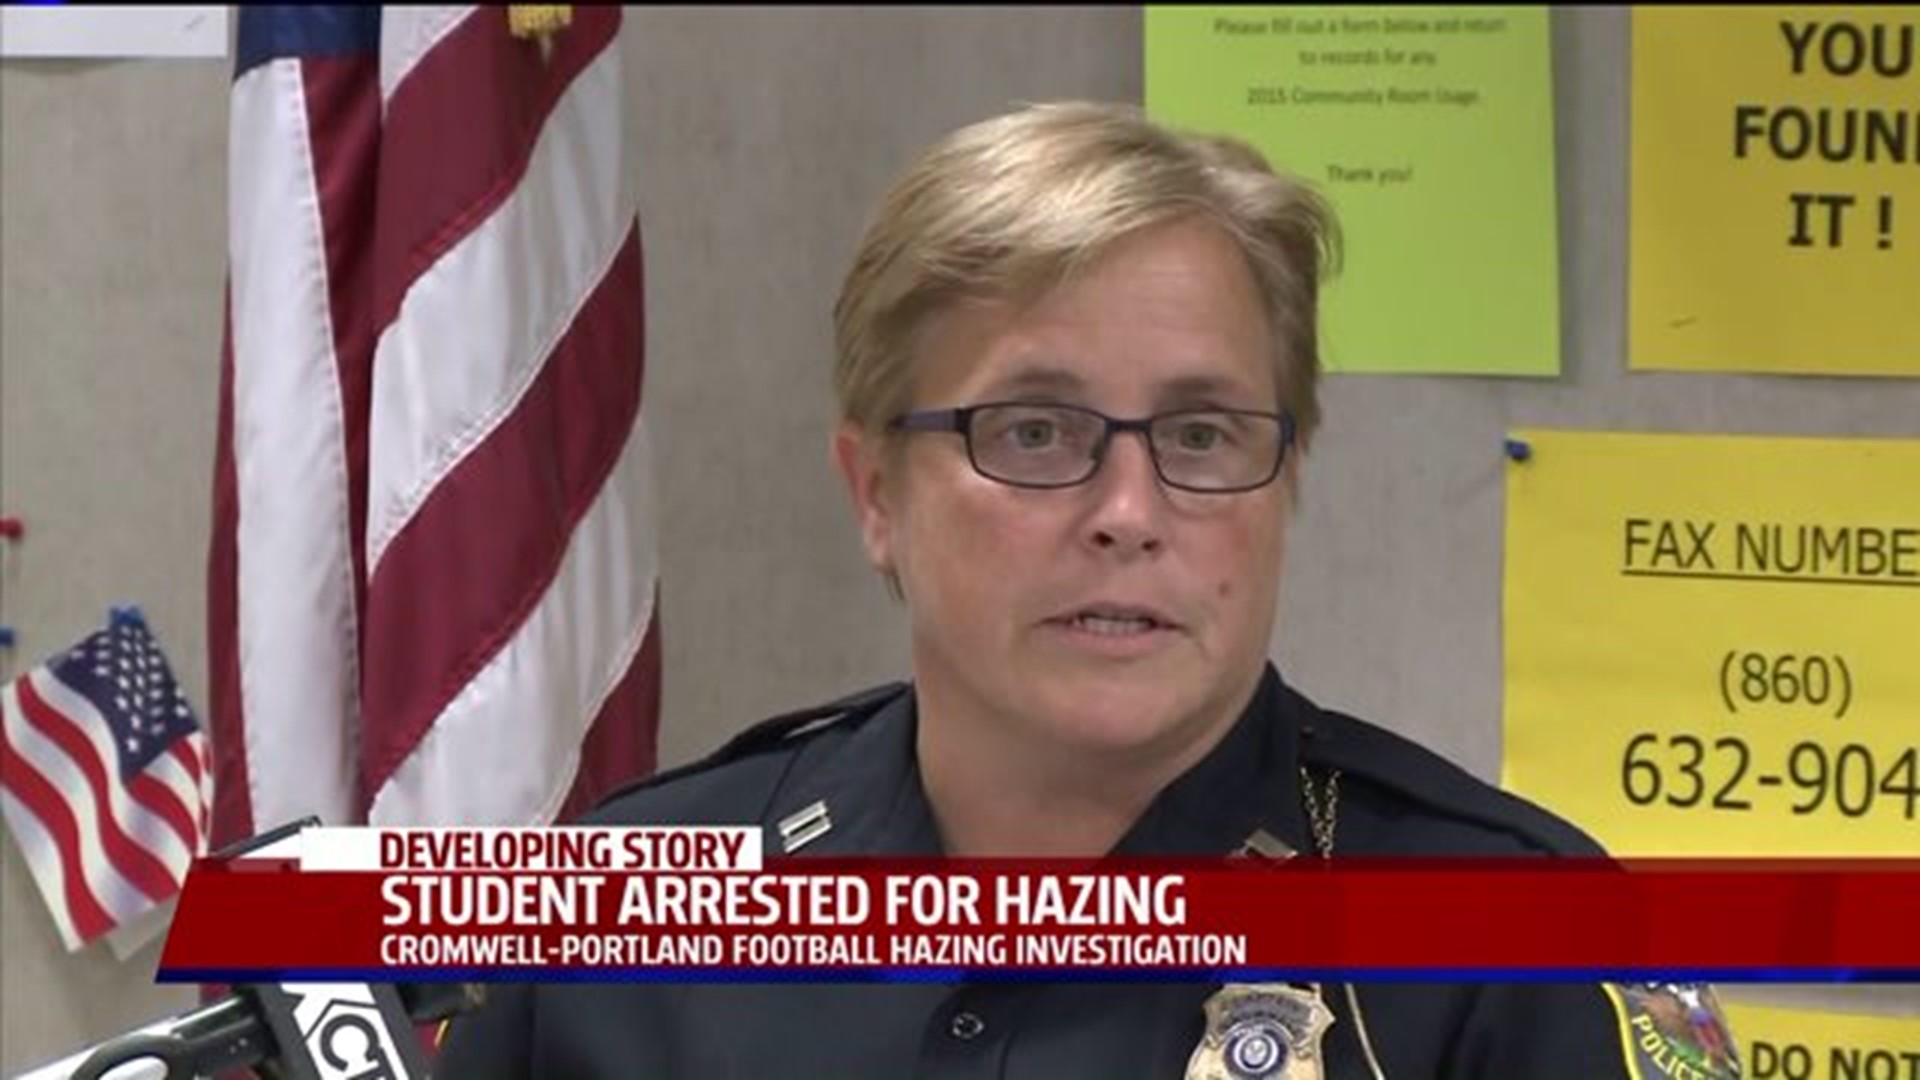 Student arrested for hazing